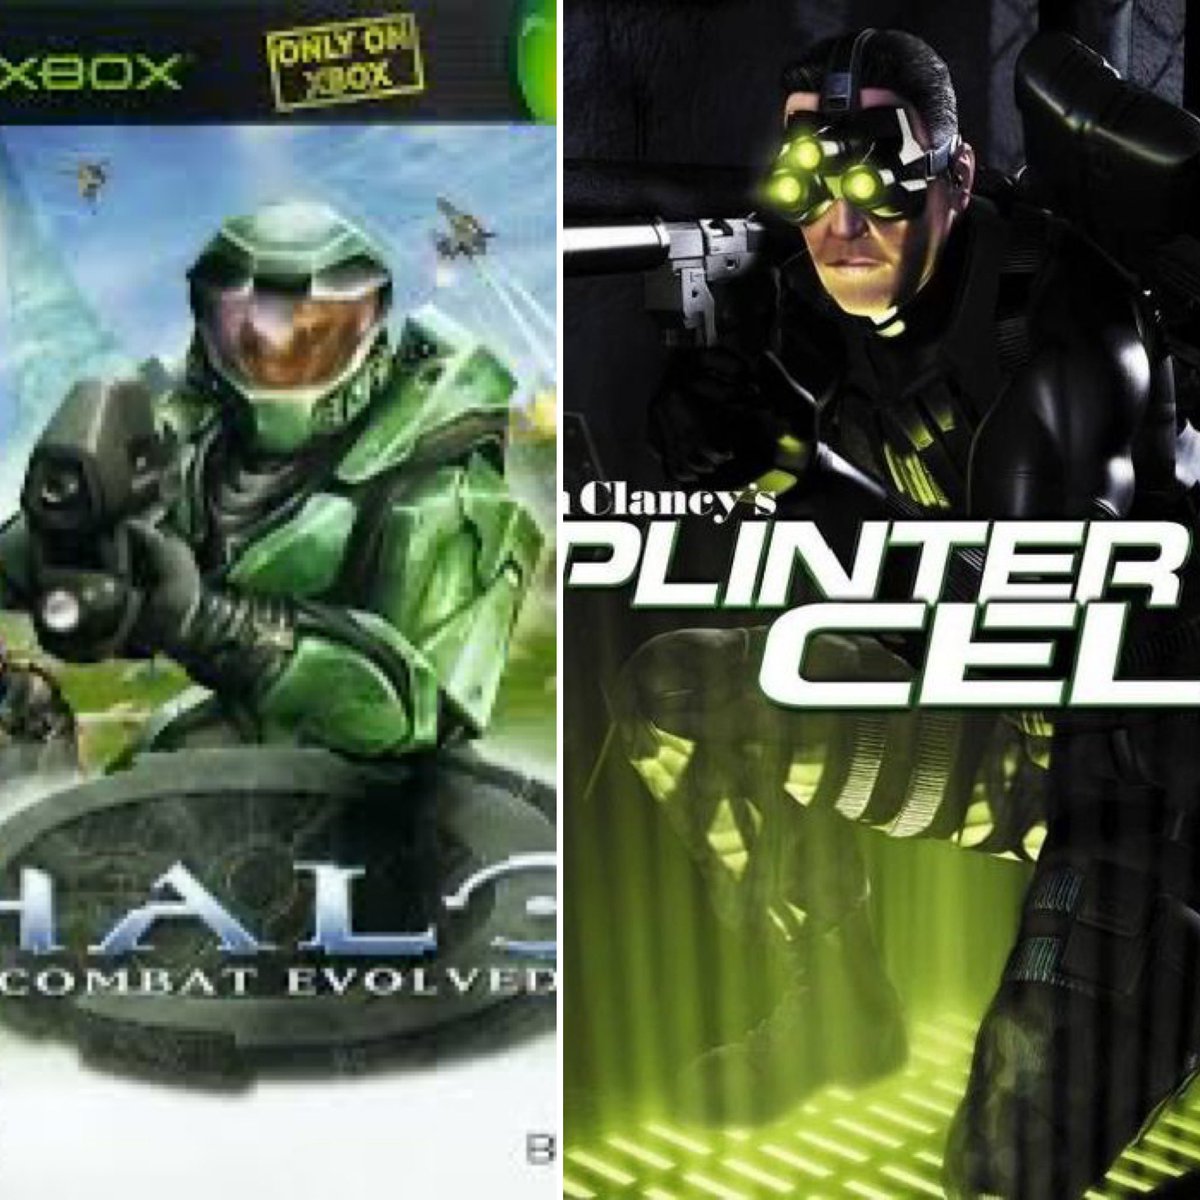 The two games that had me hooked #halo #splintercell